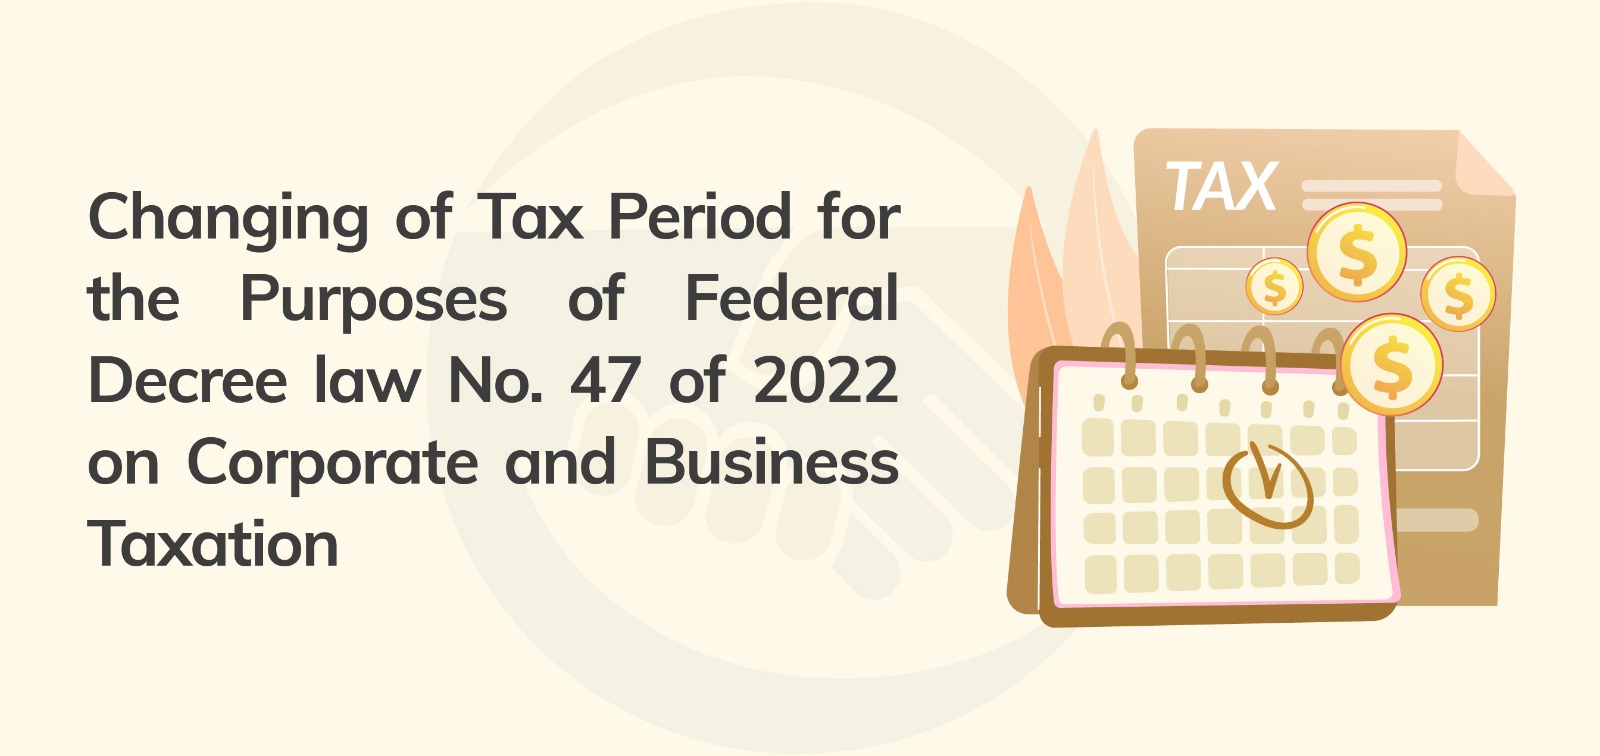 Changing of Tax Period for the Purposes of Federal Decree law No. 47 of 2022 on Corporate and Business Taxation